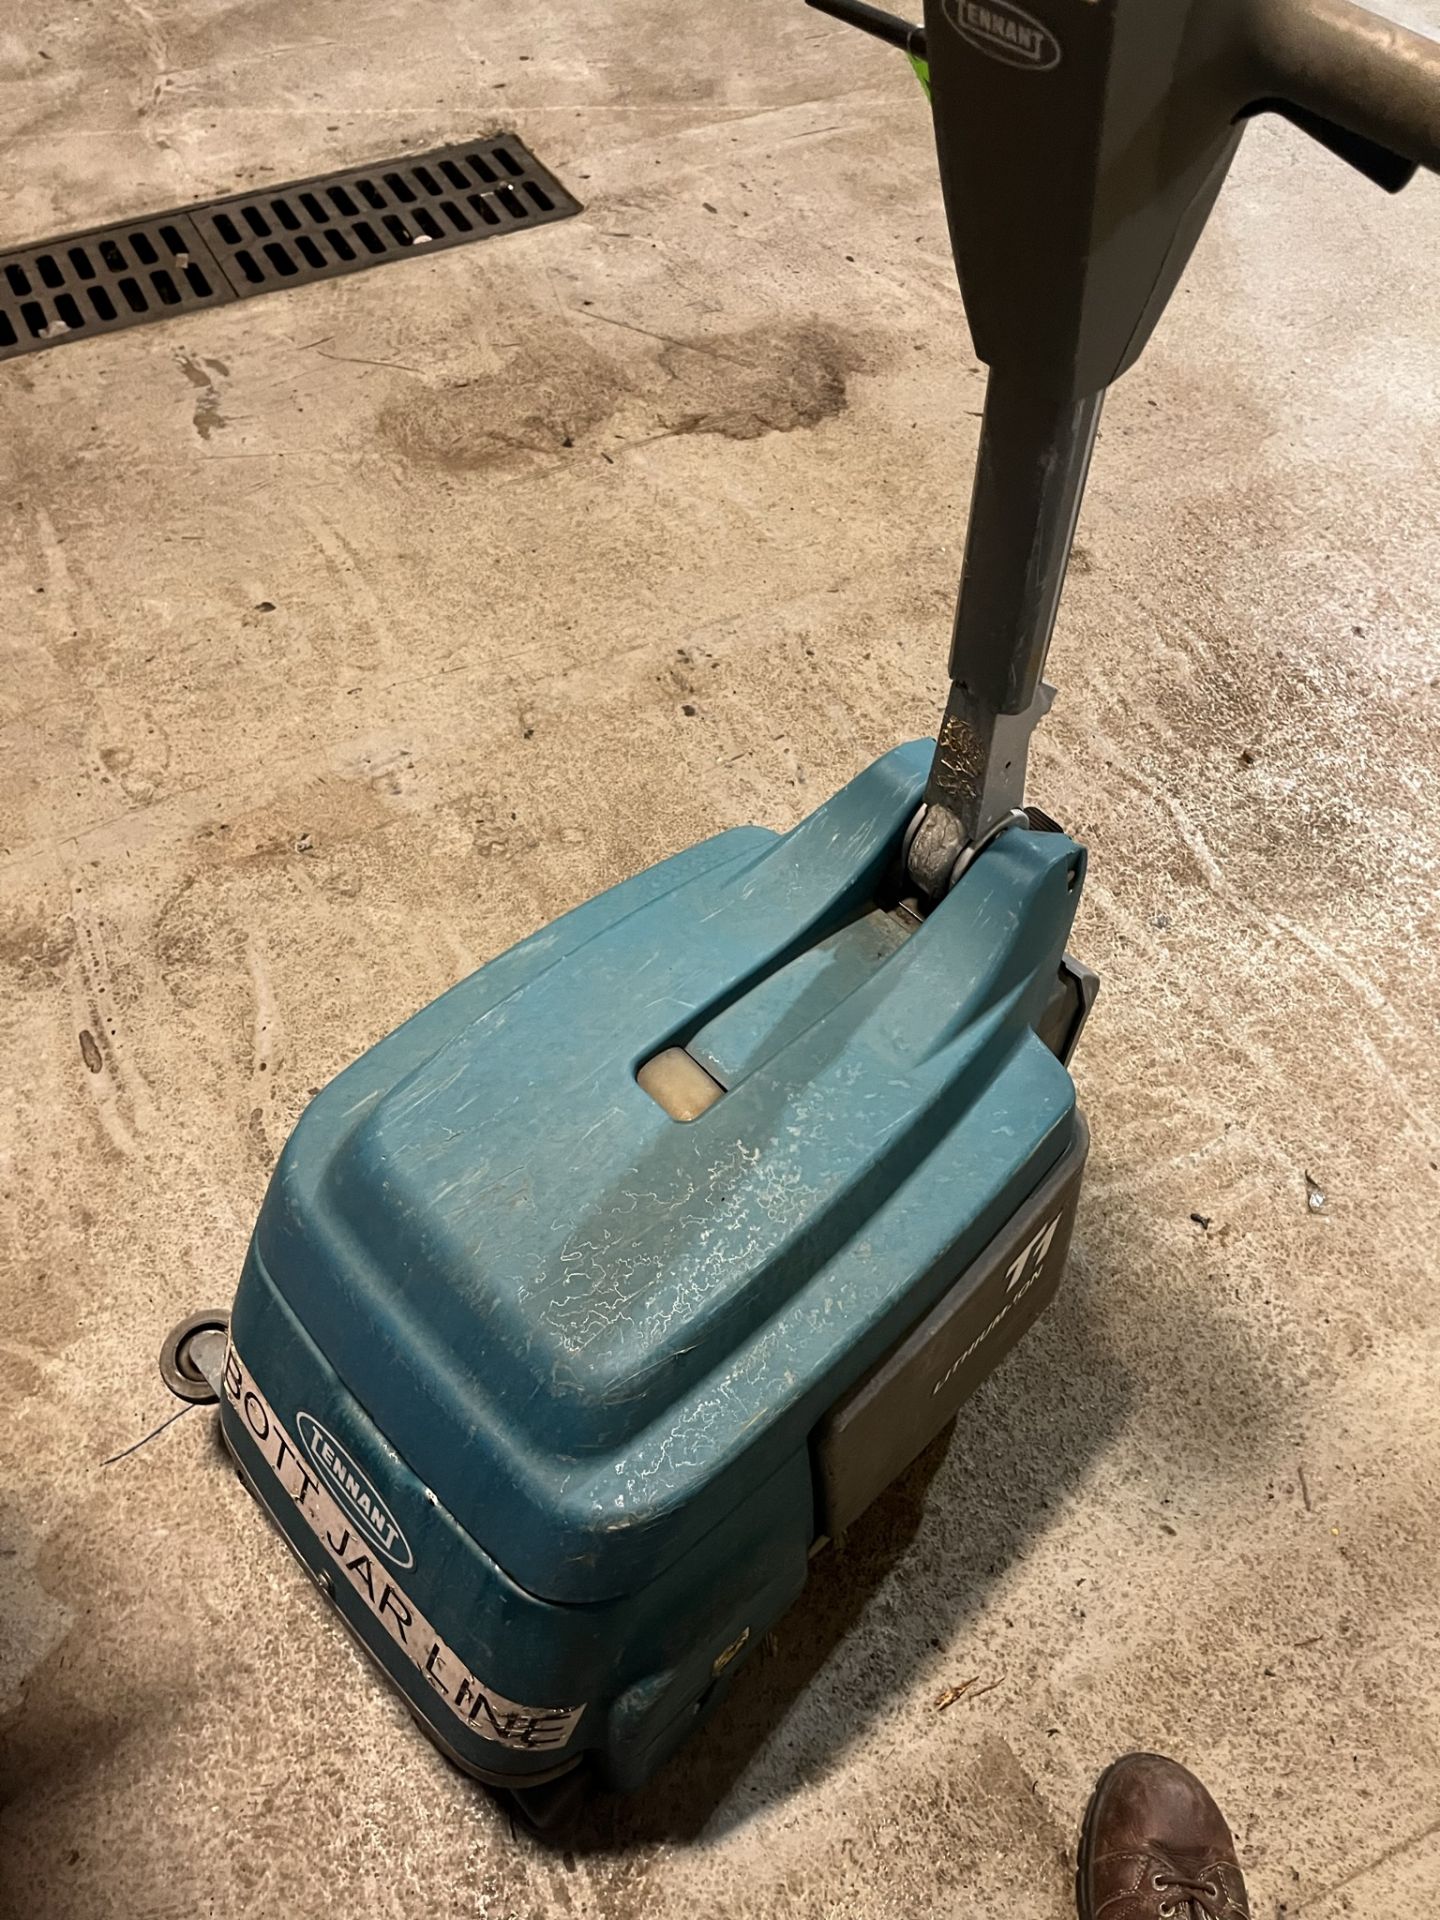 TENNANT T1 CORDED WALK BEHIND FLOOR SCRUBBER (Located Freehold, NJ) (Simple Loading Fee $137.50) - Image 6 of 6